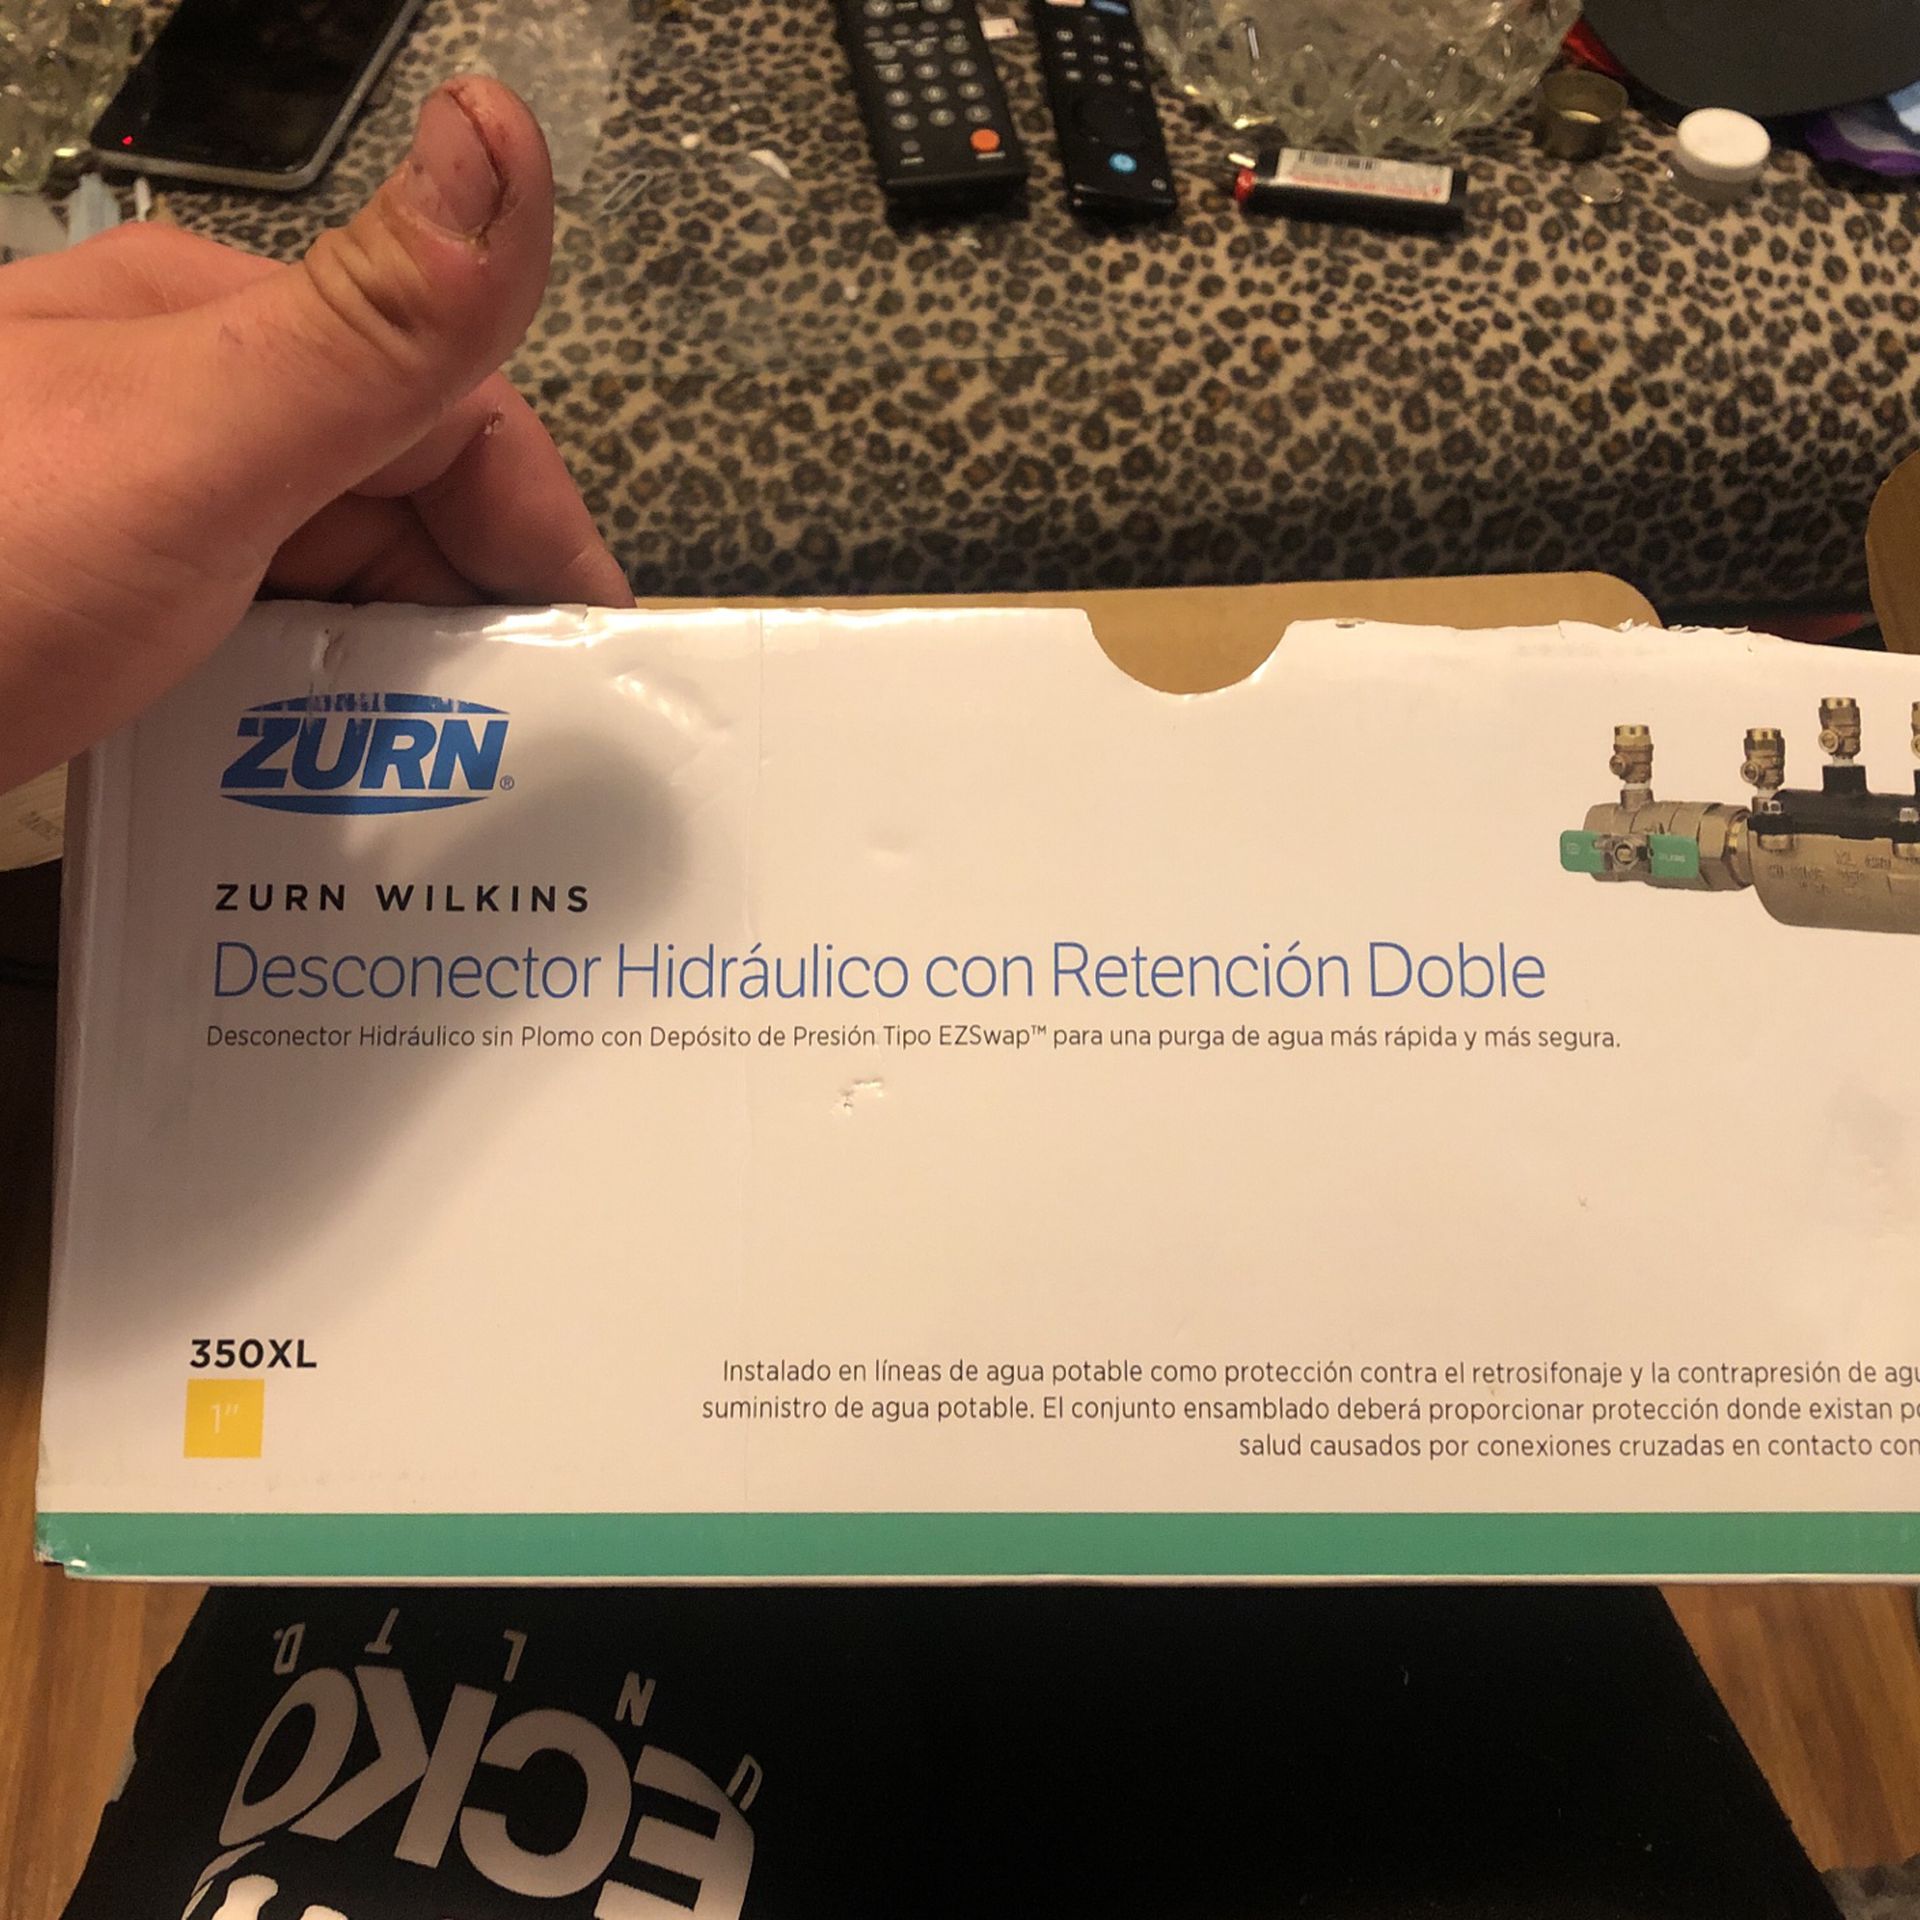 Zurn Lead-free Backflow Preventer With EZSwap for Sale in Niagara Falls, NY  OfferUp